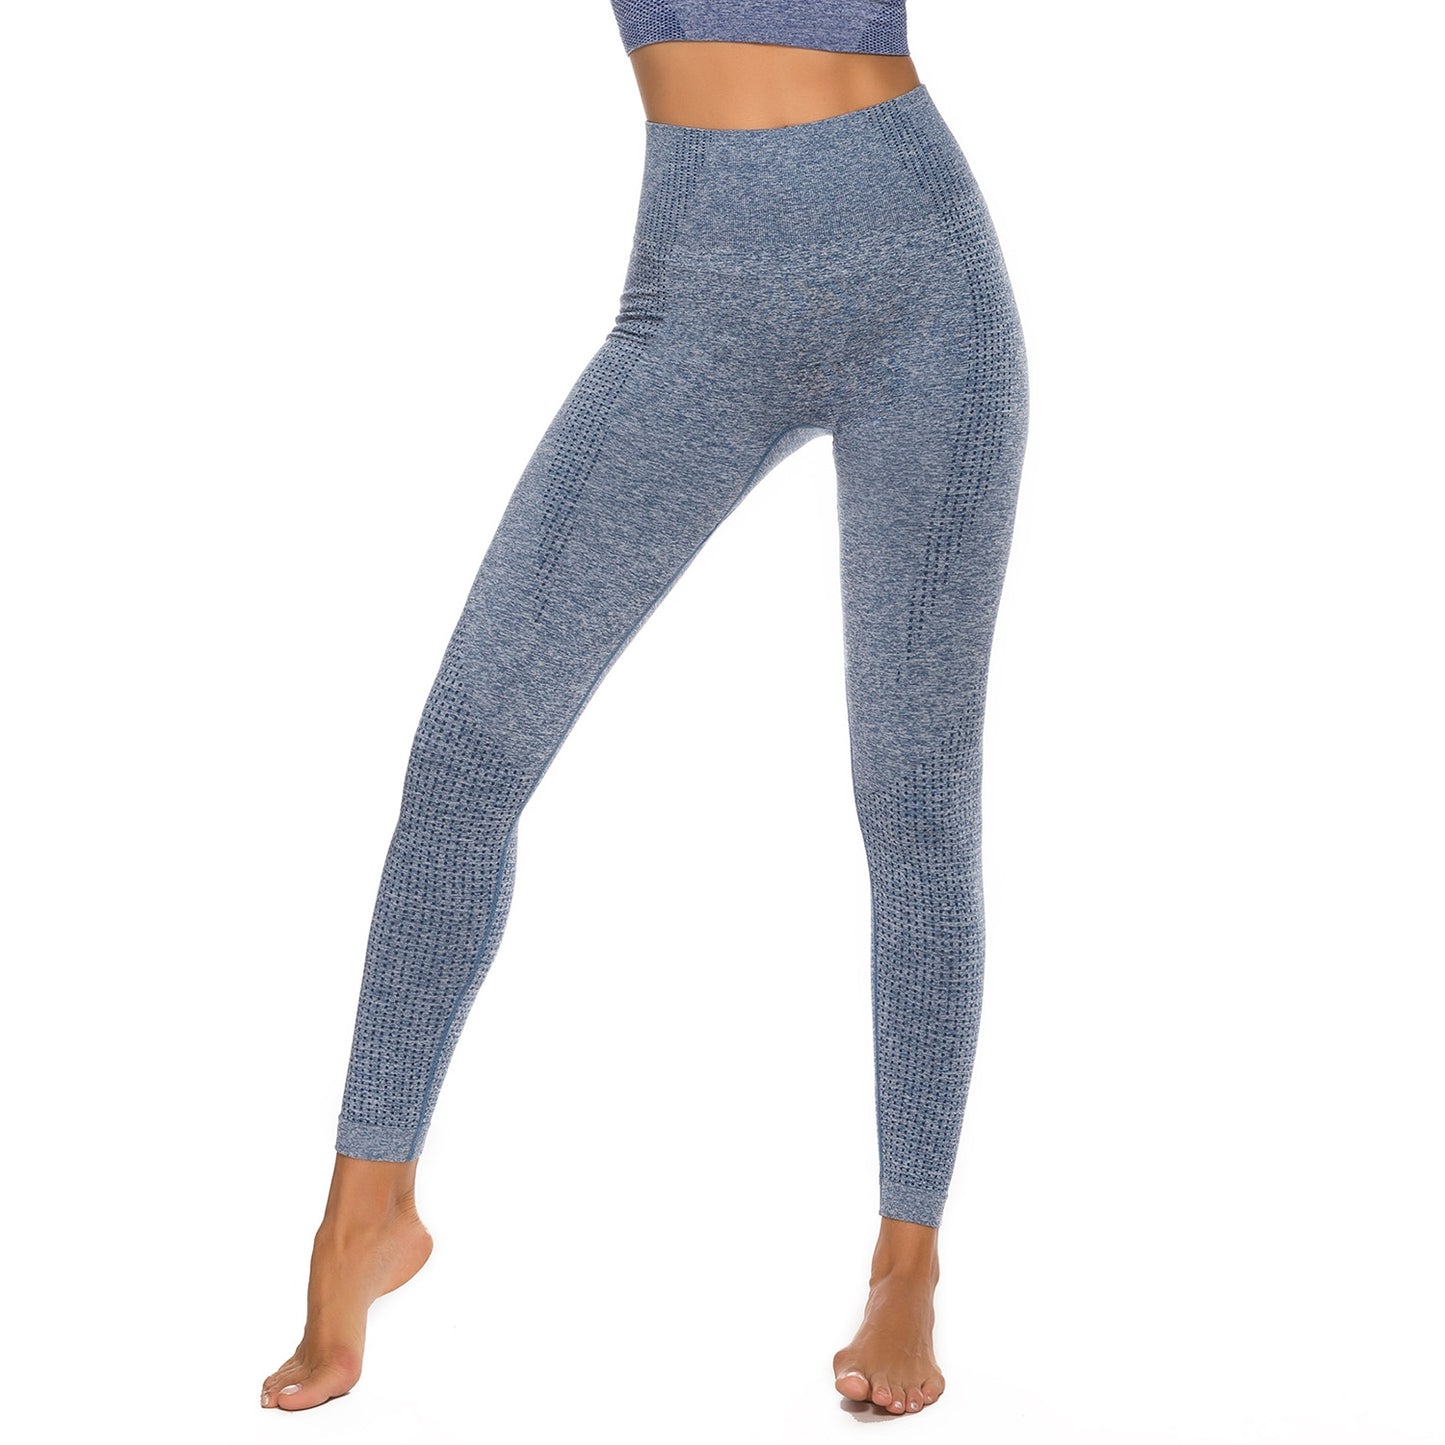 High Waist Seamless Leggings: Elevate Your Workout Style